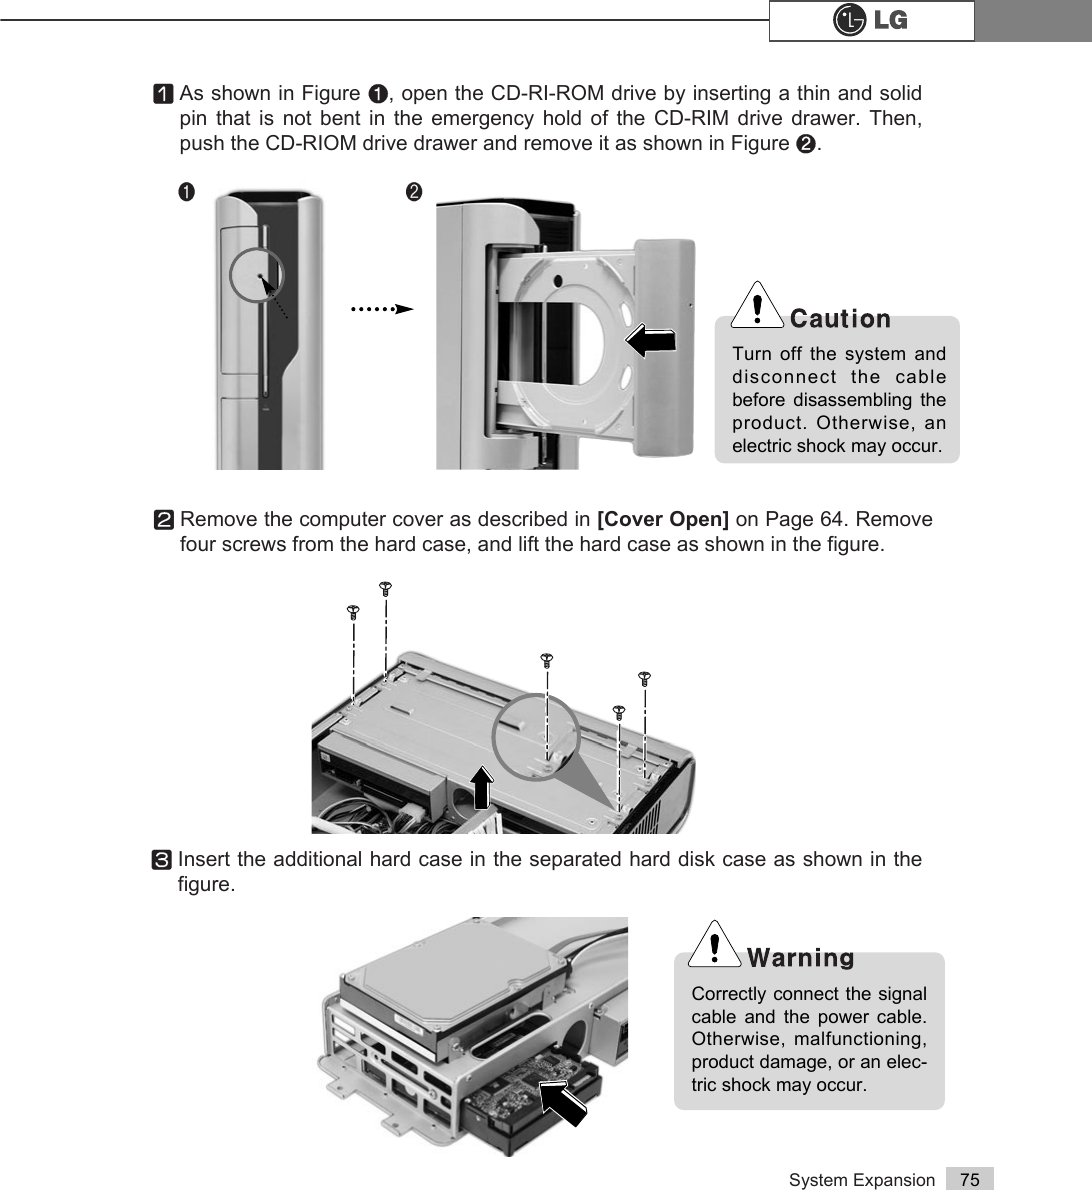 System Expansion 75ⓟRemove the computer cover as described in [Cover Open] on Page 64. Removefour screws from the hard case, and lift the hard case as shown in the figure.ⓞAs shown in Figure ℘, open the CD-RI-ROM drive by inserting a thin and solidpin that is not bent in the emergency hold of the CD-RIM drive drawer. Then,push the CD-RIOM drive drawer and remove it as shown in Figure ℙ.ⓠInsert the additional hard case in the separated hard disk case as shown in thefigure.Turn off the system anddisconnect the cablebefore disassembling theproduct. Otherwise, anelectric shock may occur.Correctly connect the signalcable and the power cable.Otherwise, malfunctioning,product damage, or an elec-tric shock may occur. ℘ℙ